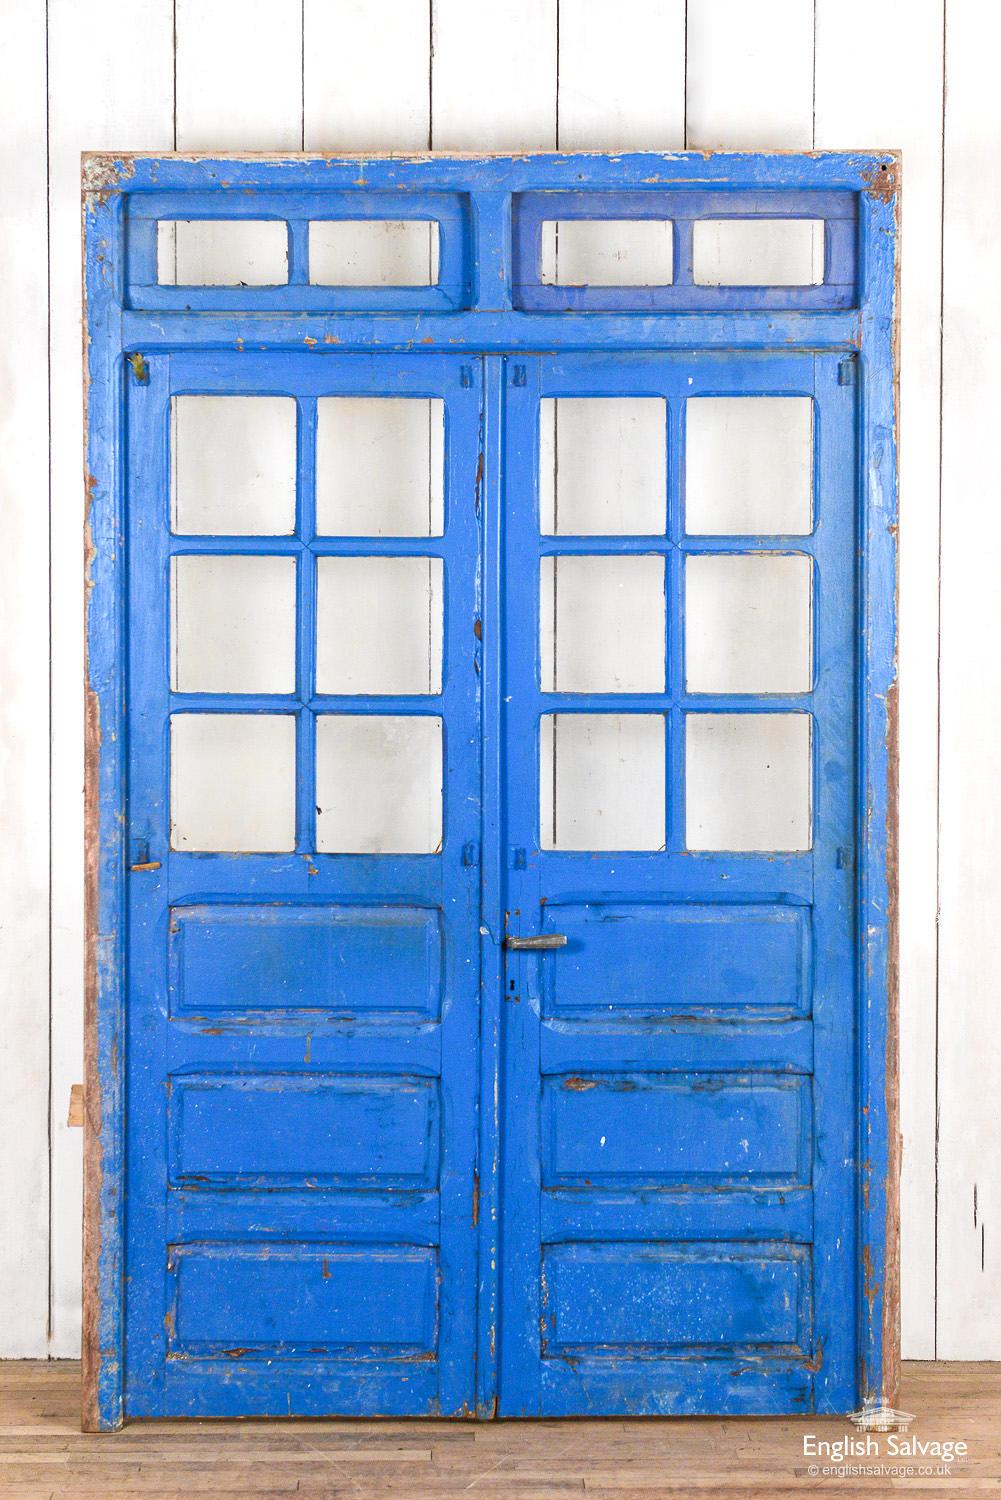 Striking set of glazed multi panel doors salvaged in Morocco. The paint is a vibrant blue colour with an appealing weathered and cracked surface patina. The door handle is Art Deco in style and the interior locking system is an espagnolette bar